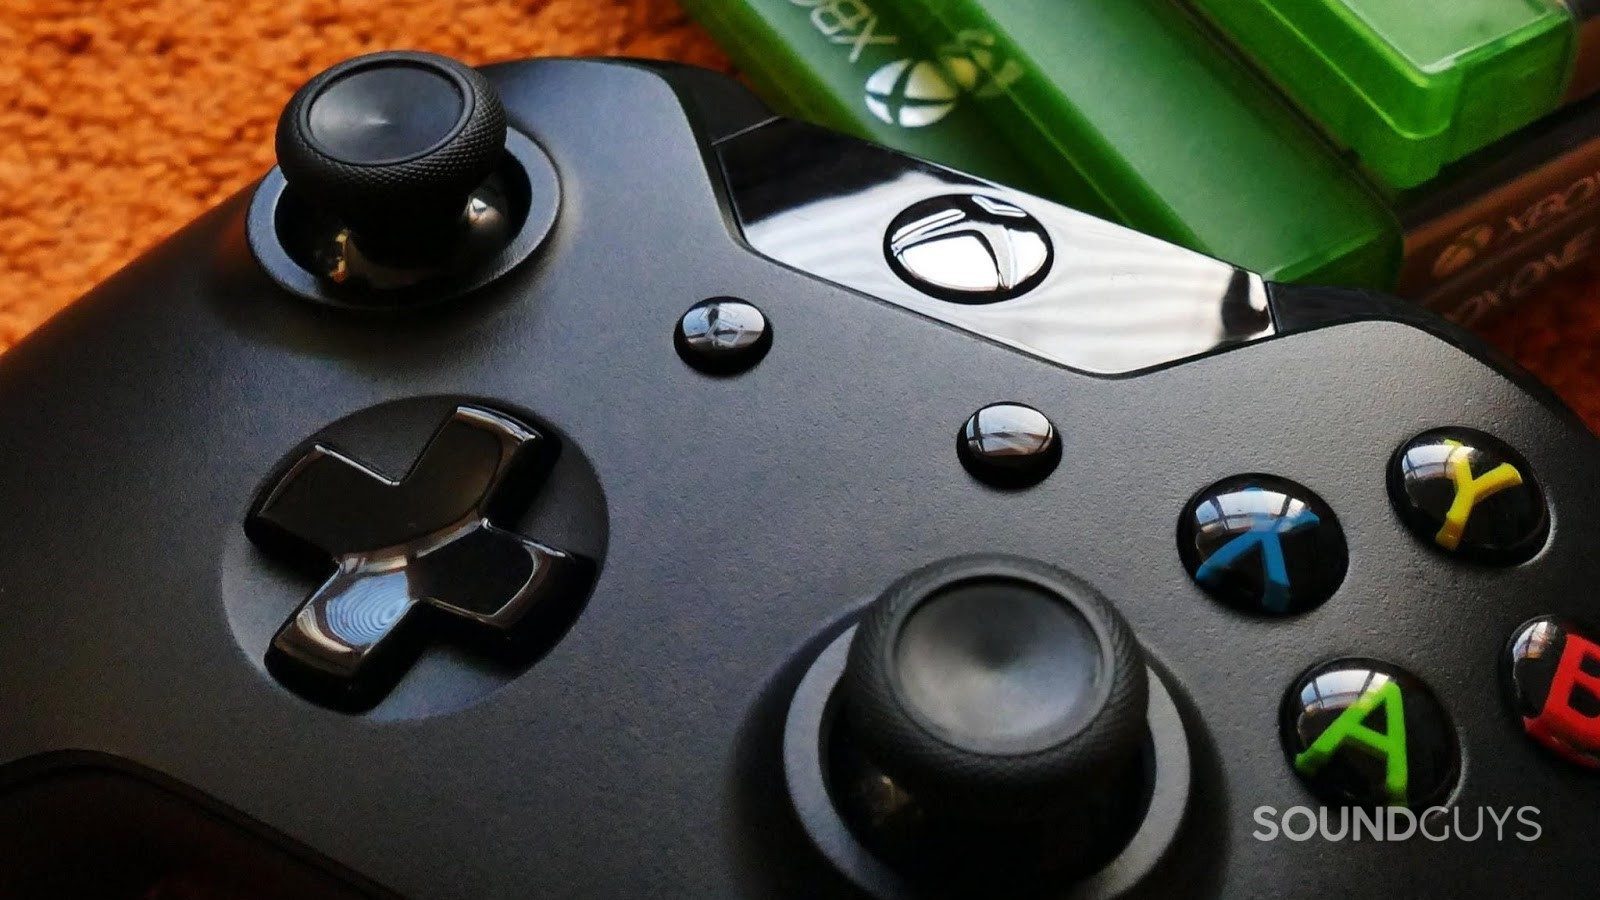 The Microsoft Xbox controller resting near a stack of games.